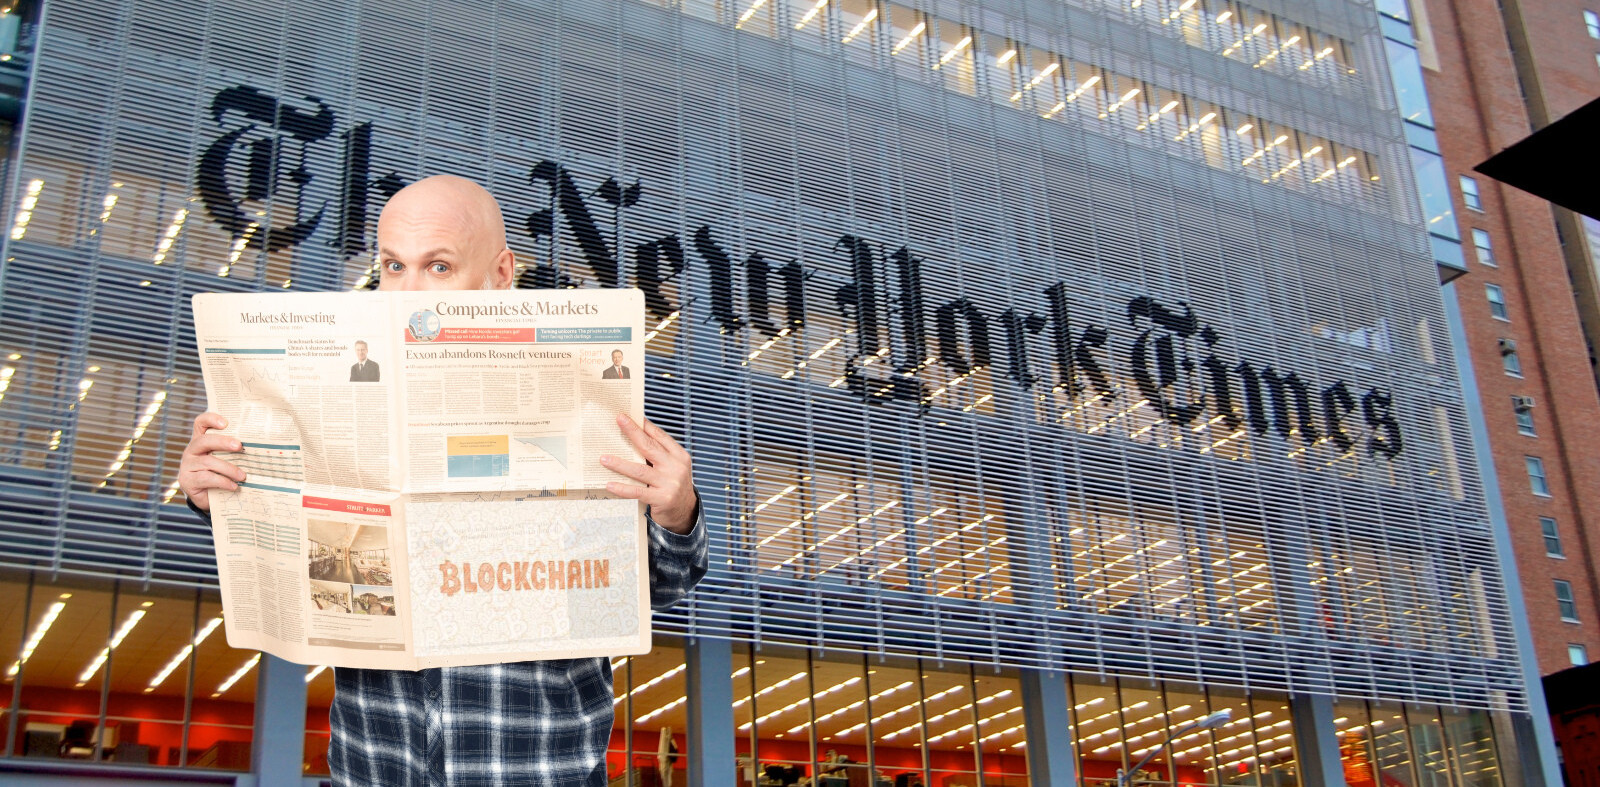 The New York Times wants to fight fake news using blockchain – good luck to it